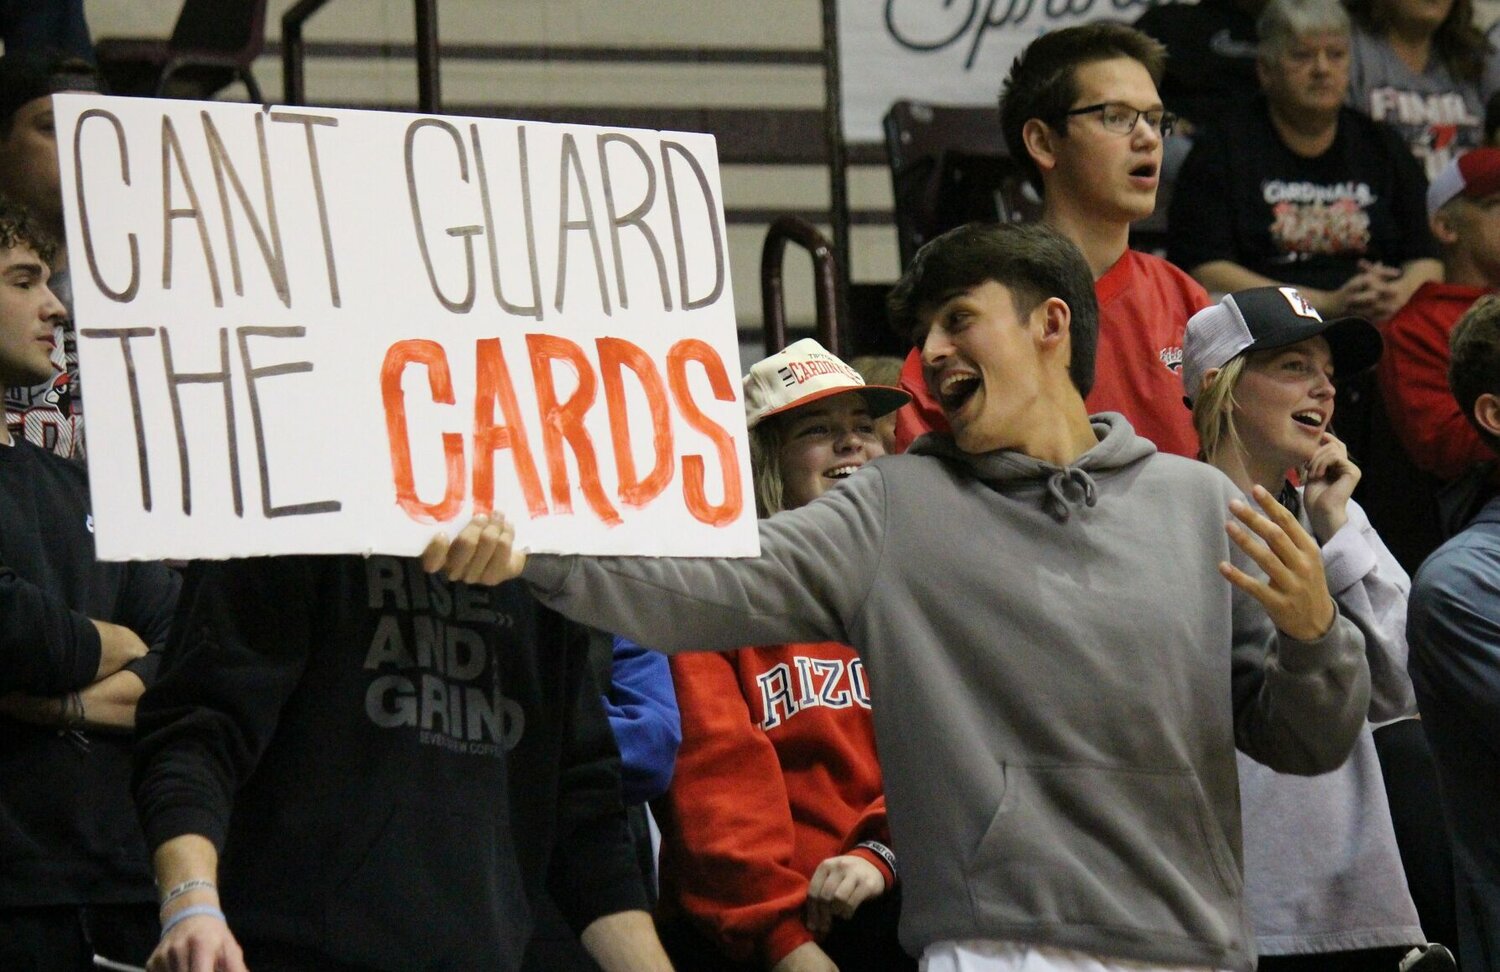 A Tipton fan holds up a sign in the second half of Friday night's game against the Lady Pirates.